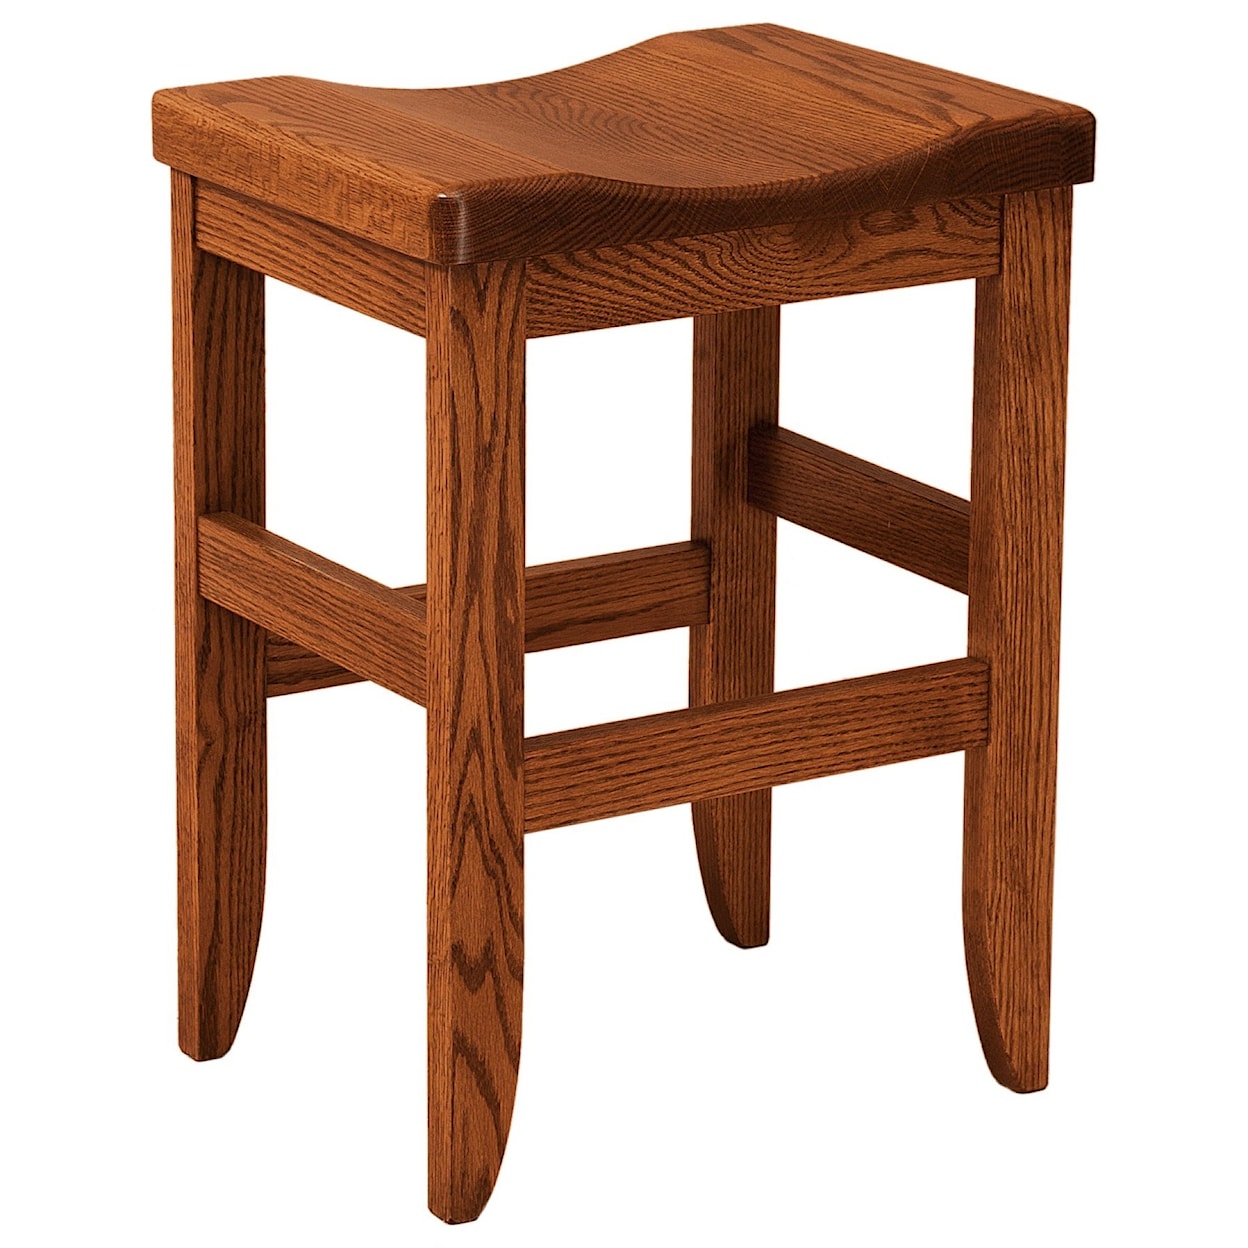 F&N Woodworking Clifton Bar Stool 30" Height - Fabric Seat